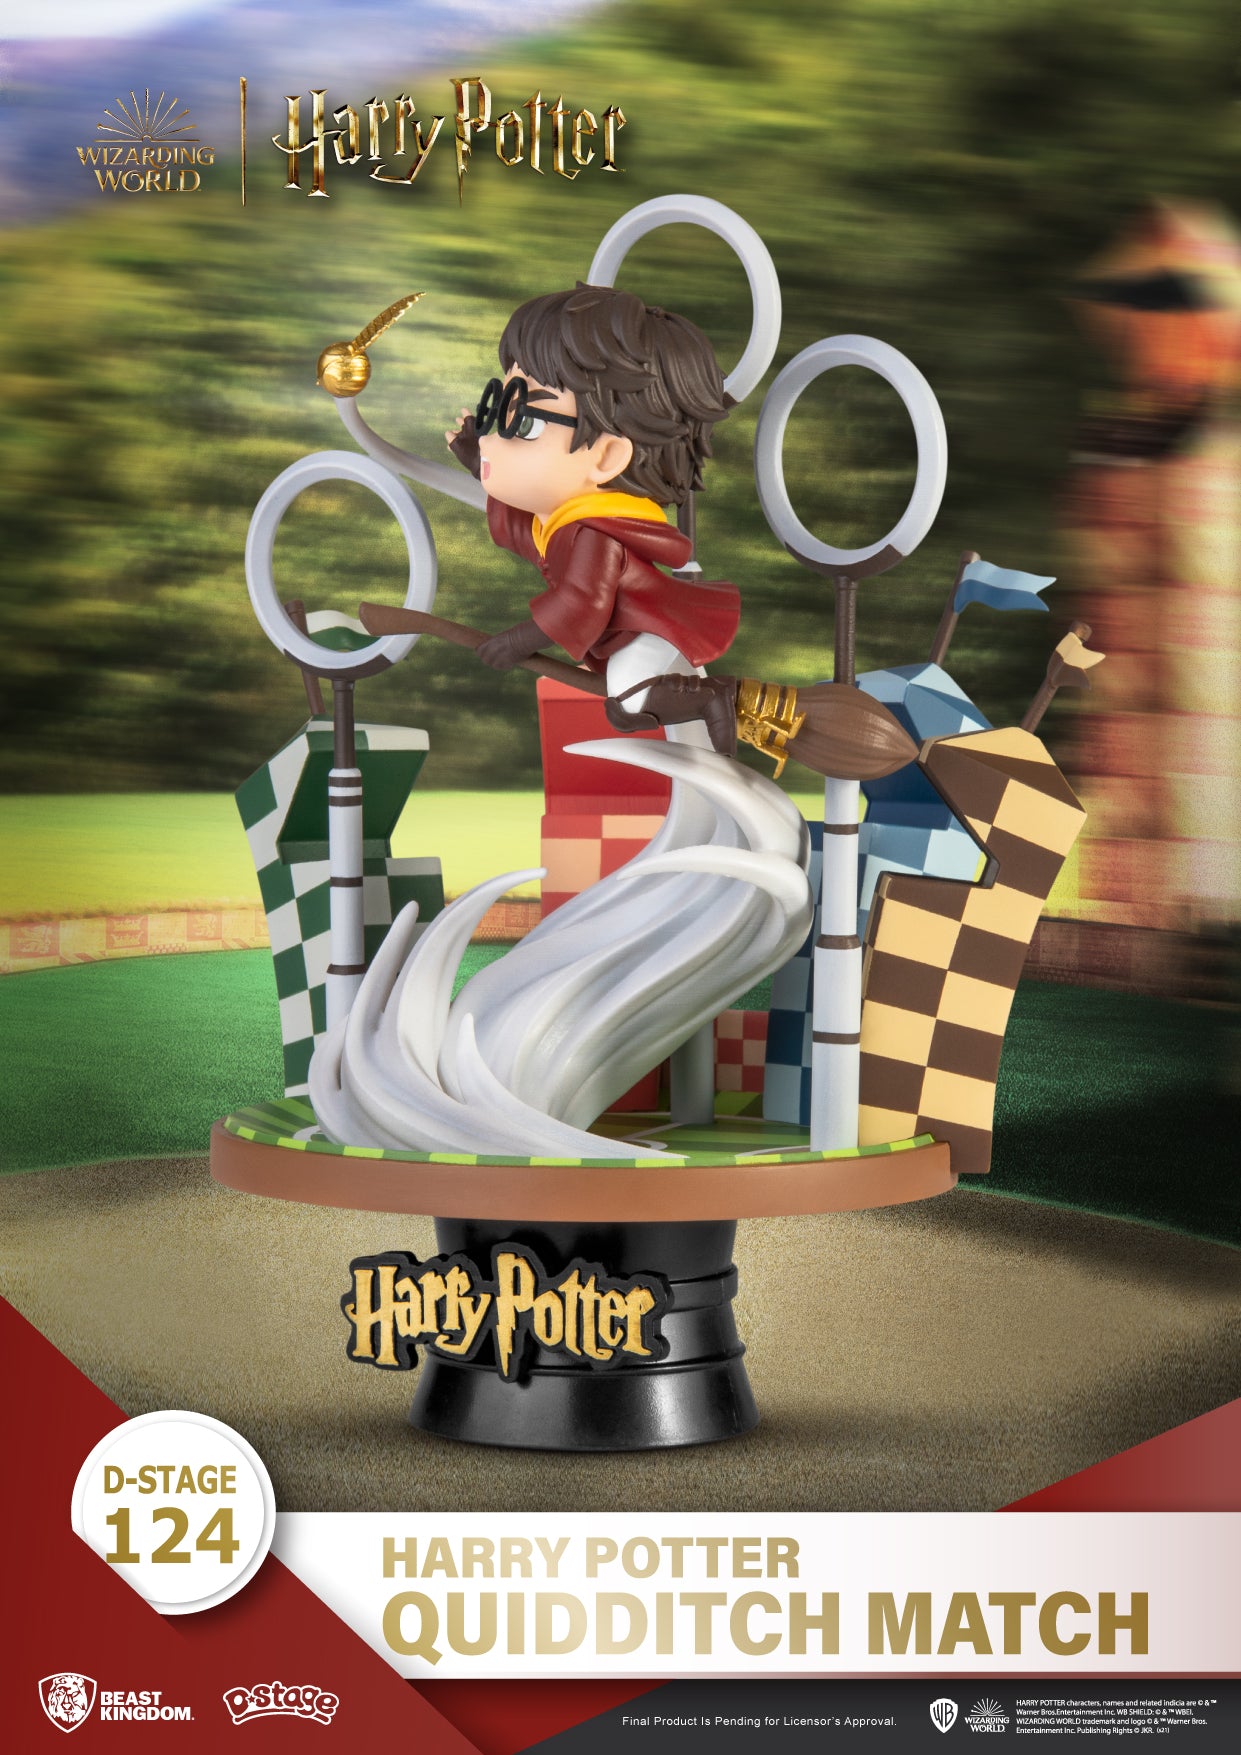 Beast Kingdom DS-124 Harry Potter-Quidditch Match Diorama Stage D-Stage Figure Statue